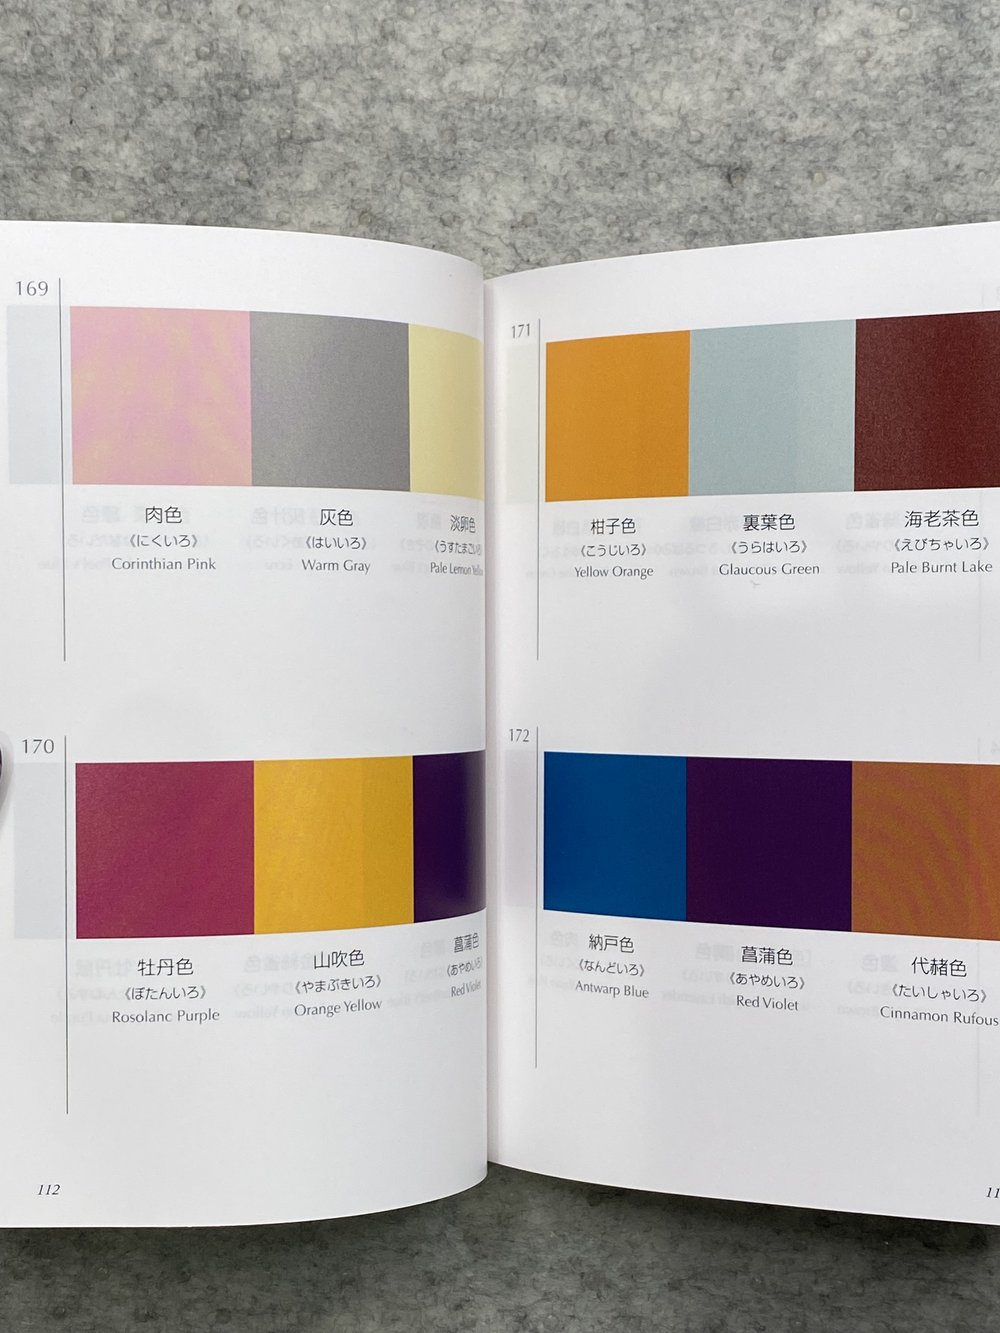 A Dictionary of Color Combinations — Bakezori Books